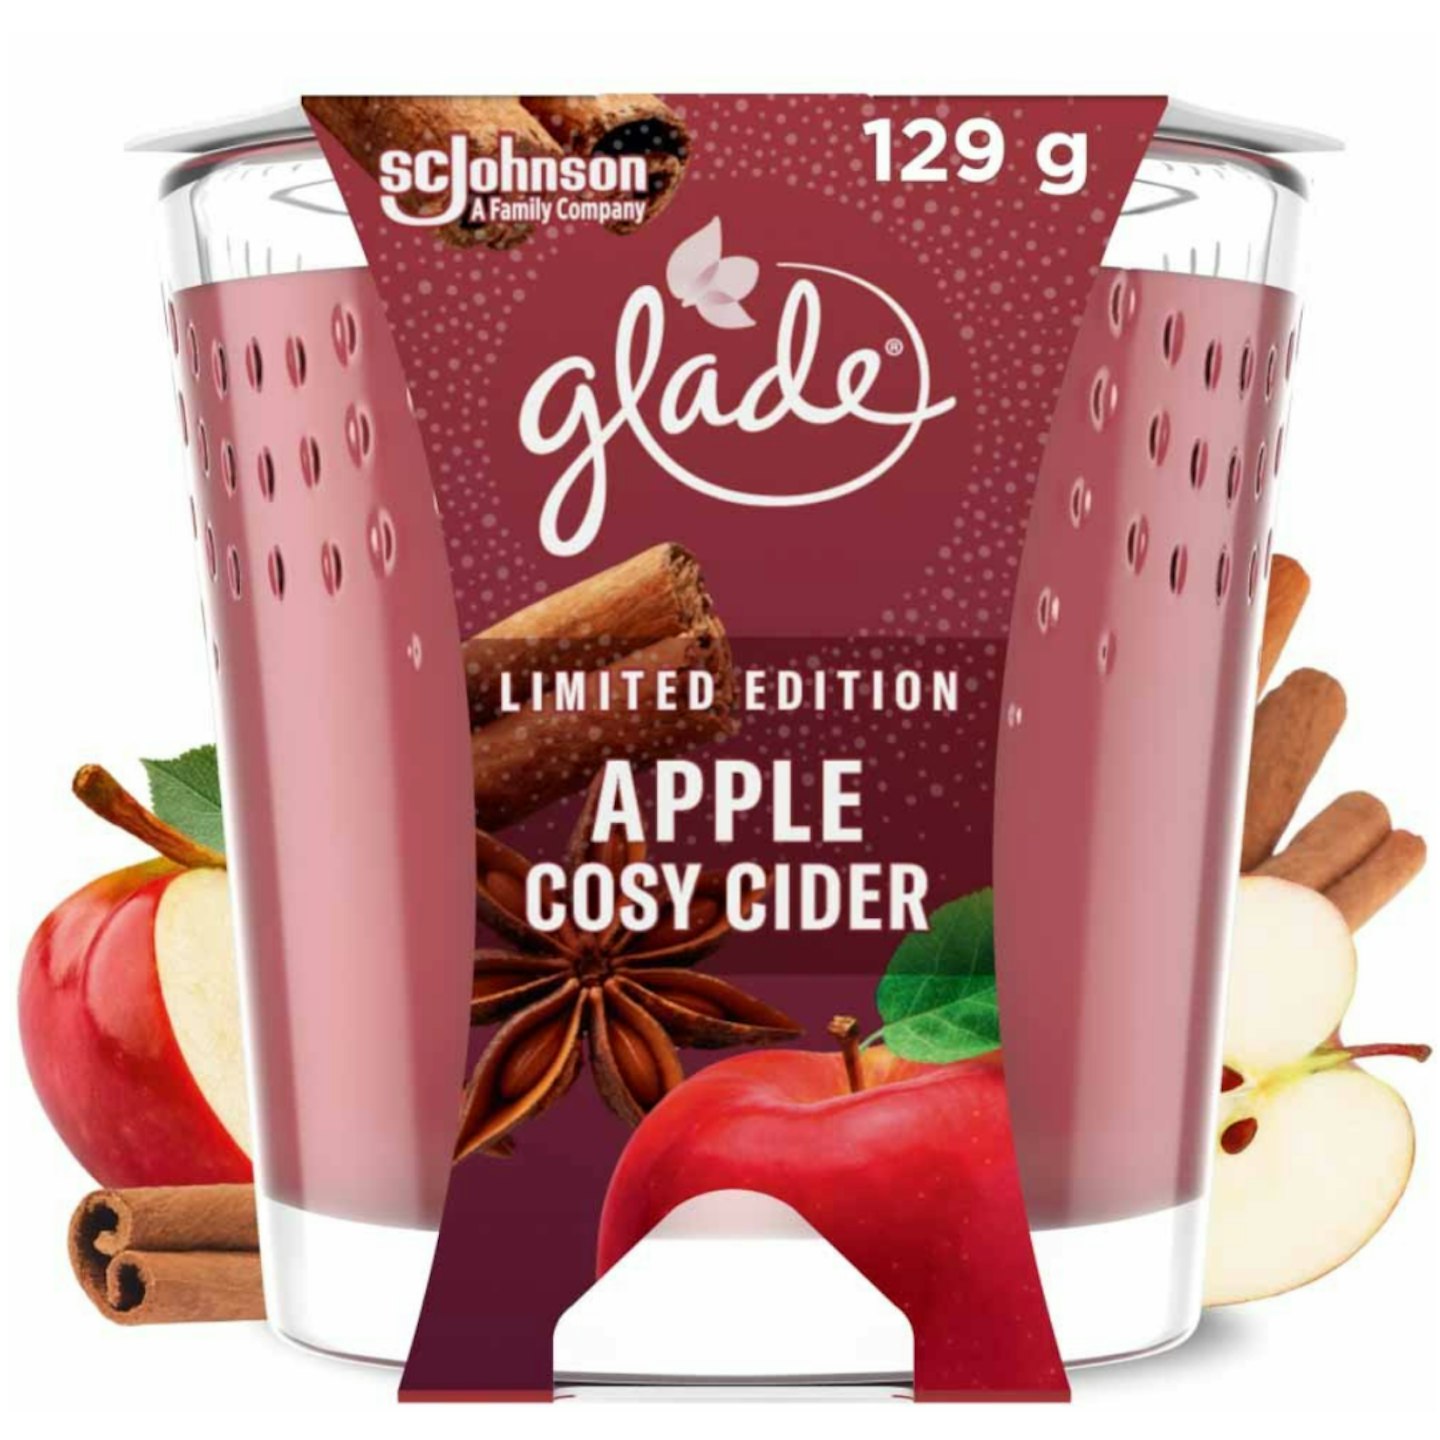 3 Glade cozy cider sipping 3 Wick Candle 6.8 oz limited edition